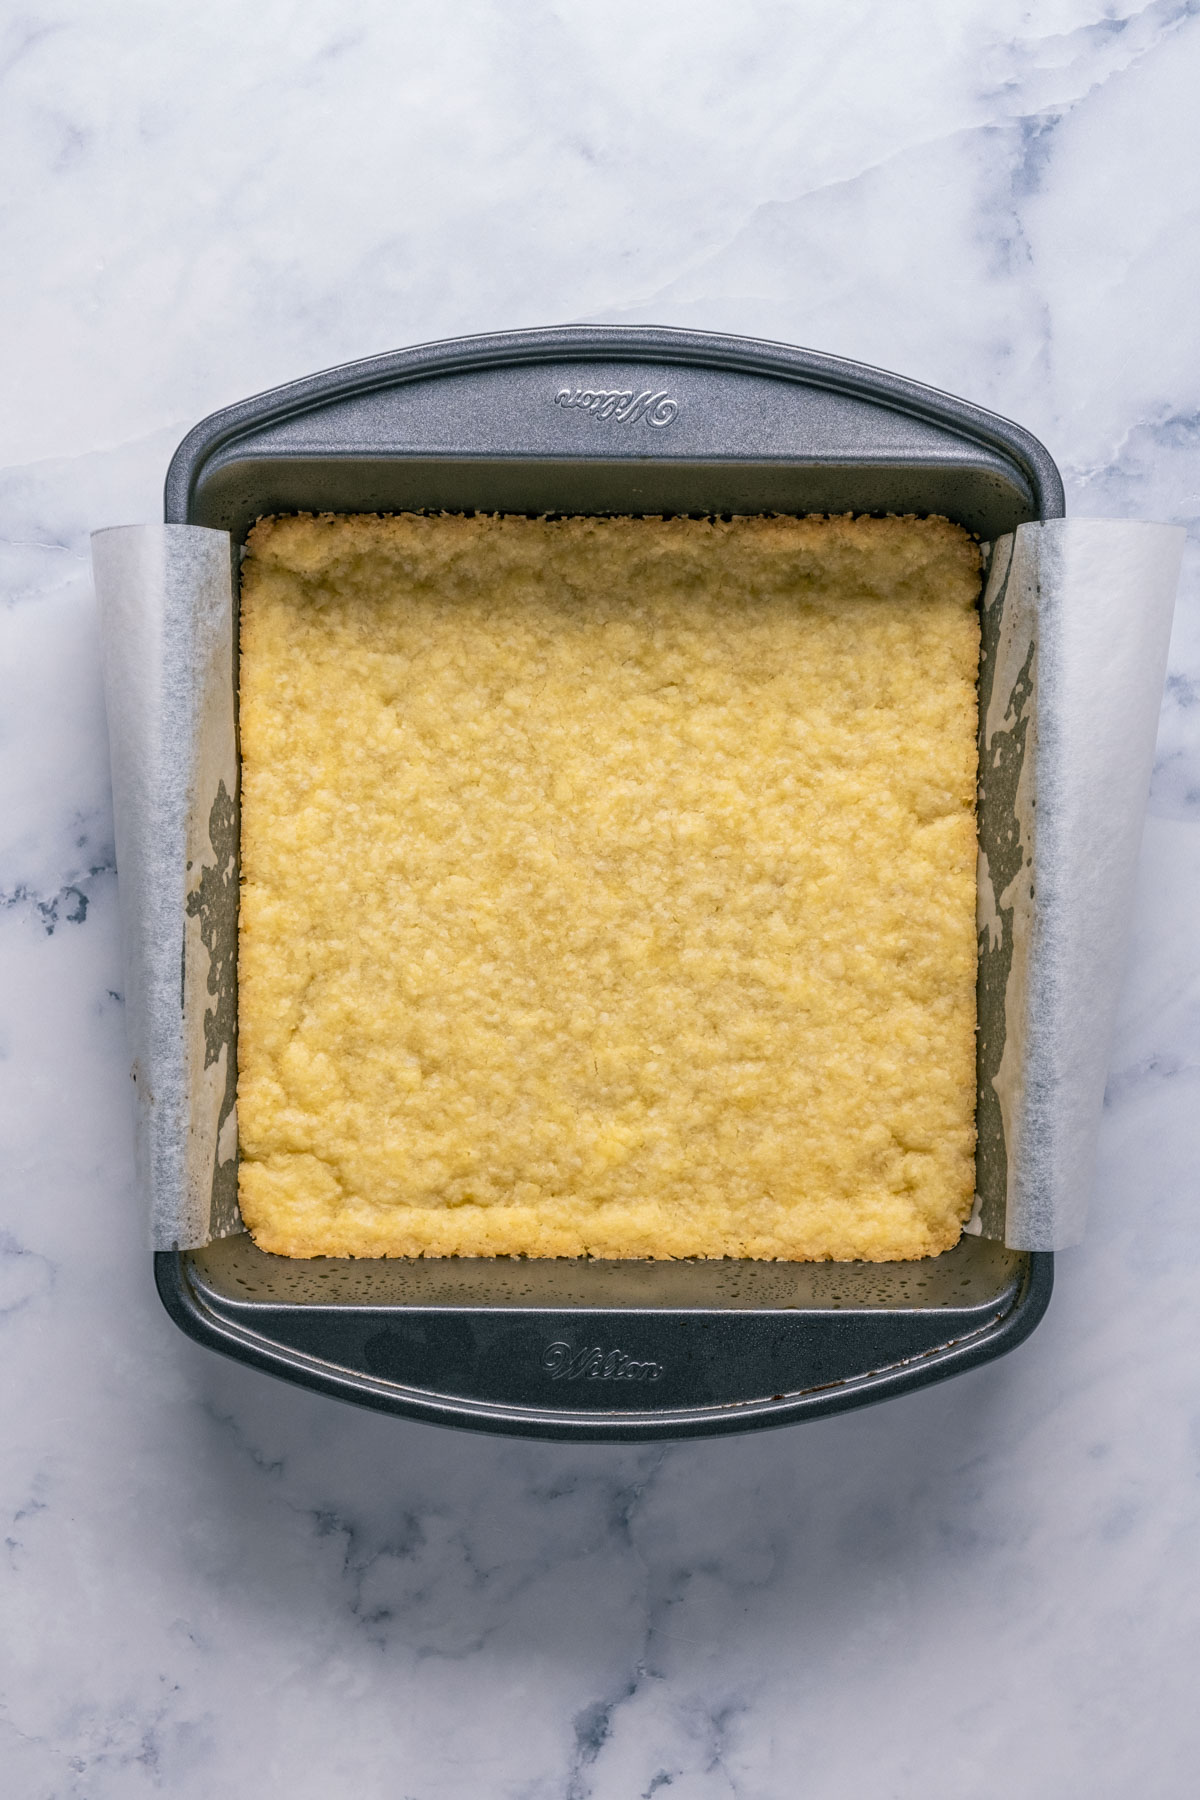 Baked vegan shortbread crust in a square dish.